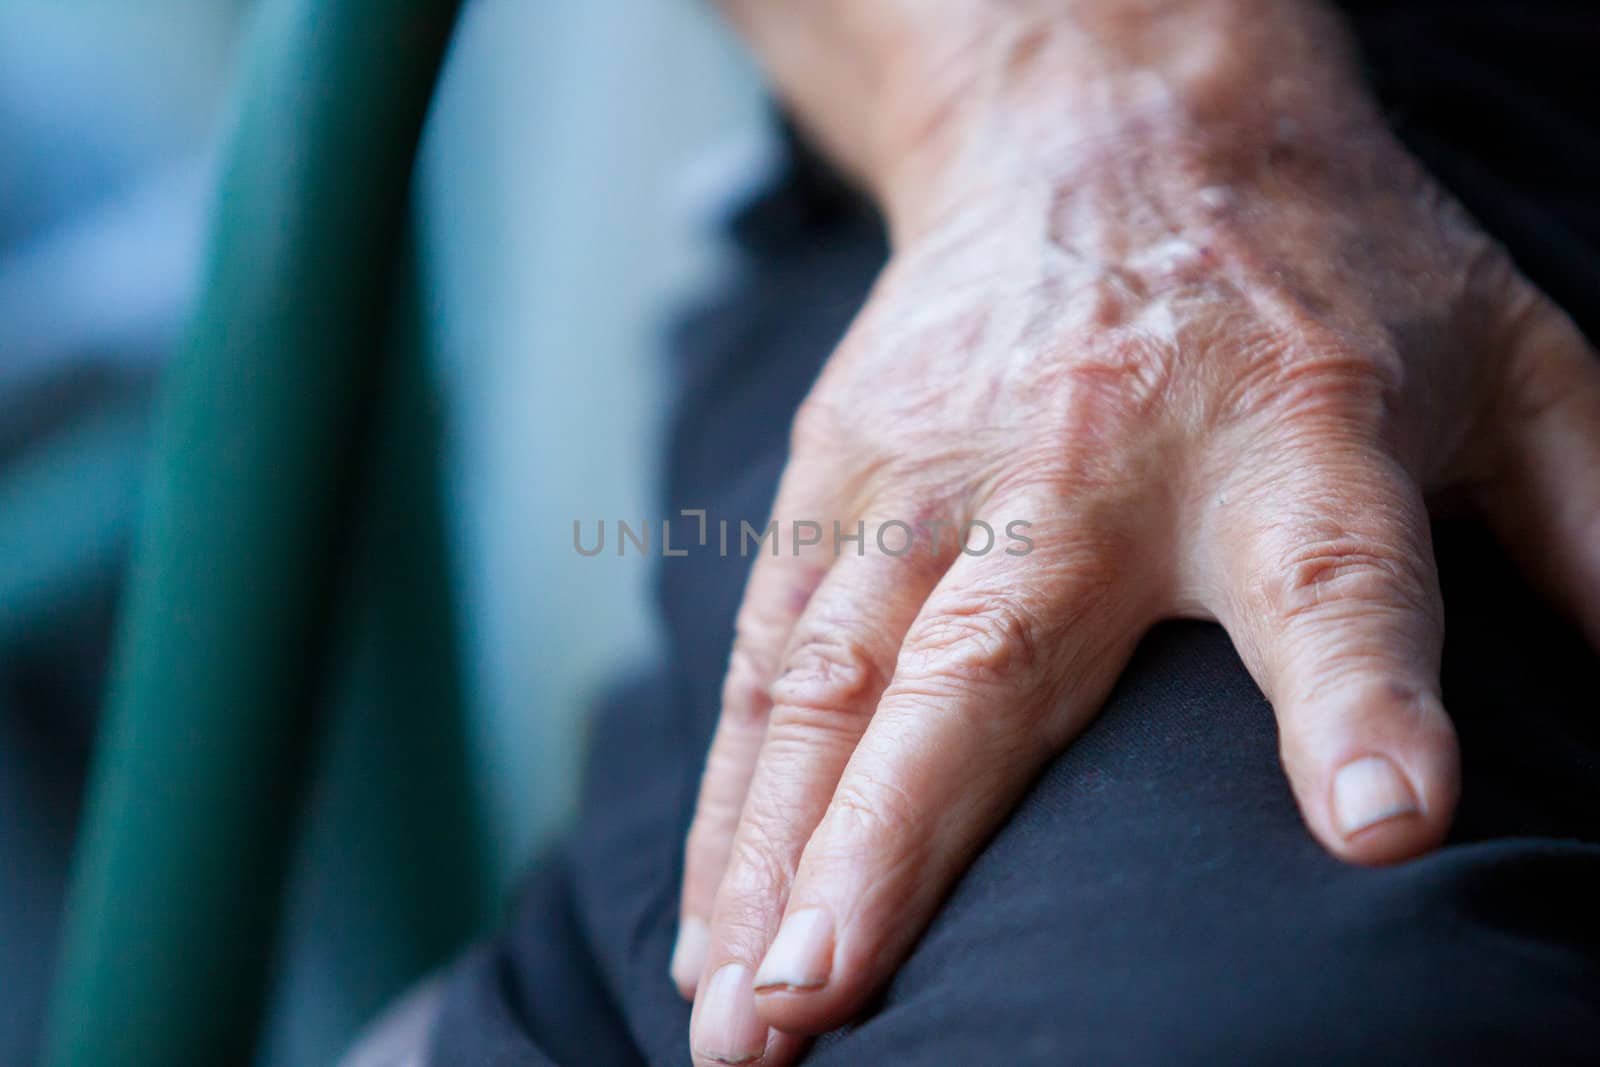 This old hand says a lot about the person it belongs to. Weathered, wrinkled, and elderly.